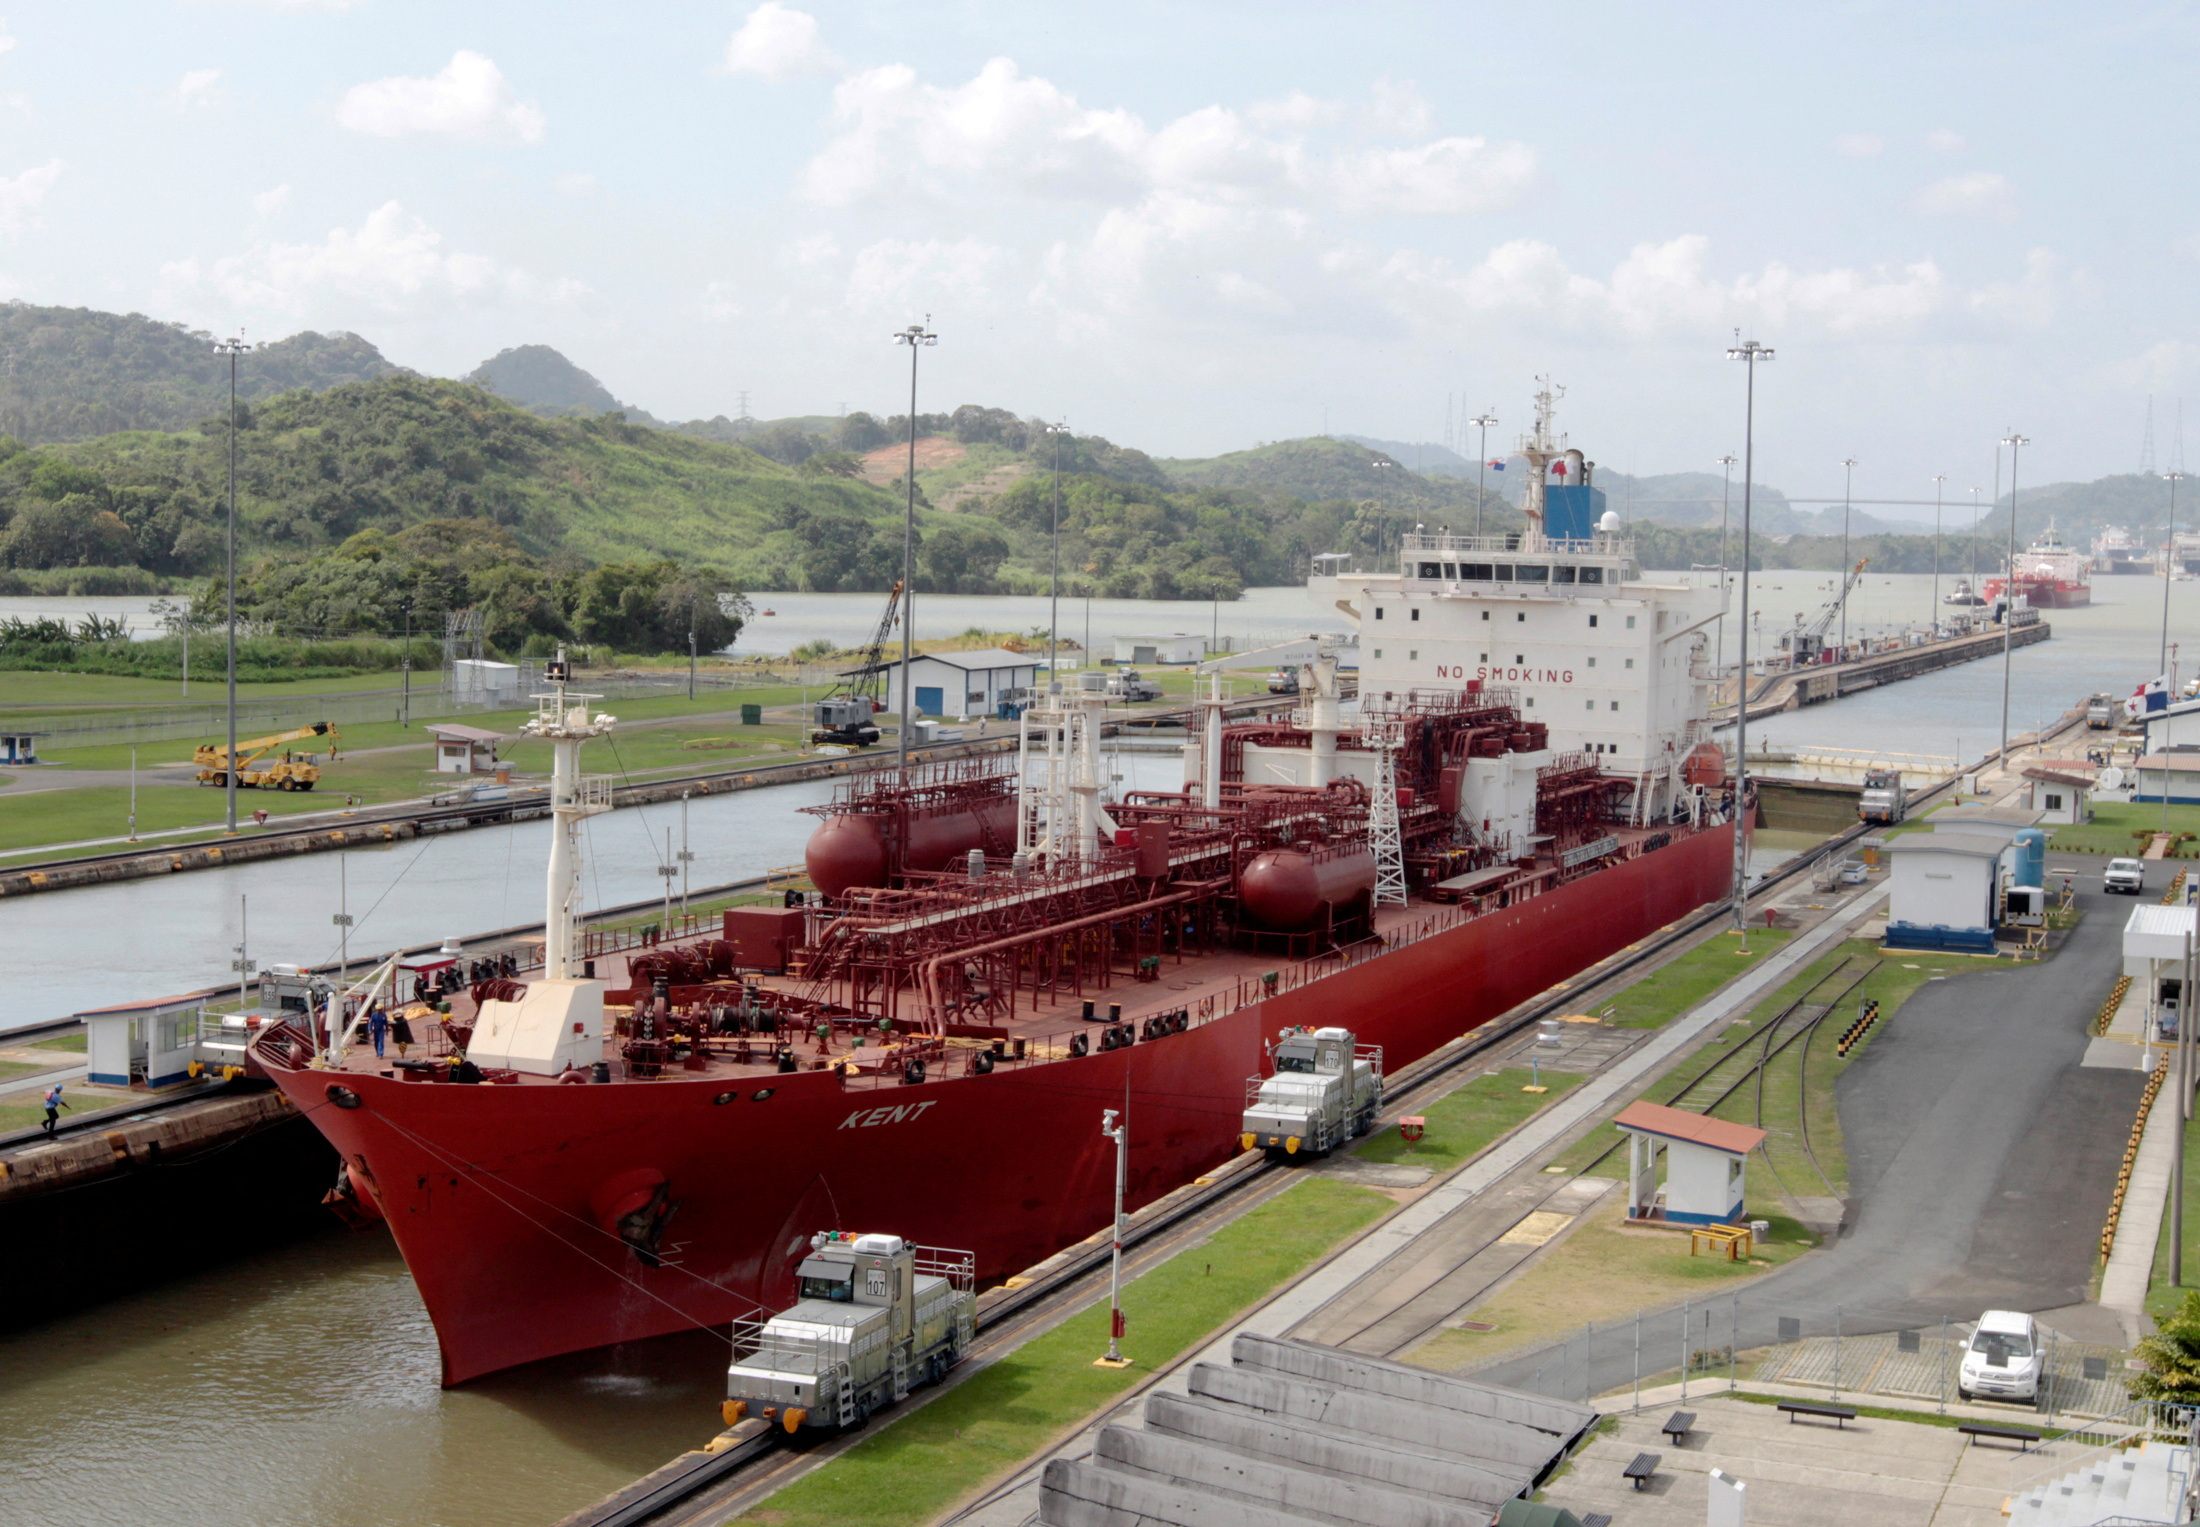 Fuel tankers face long slog as Panama Canal drought reroutes flows